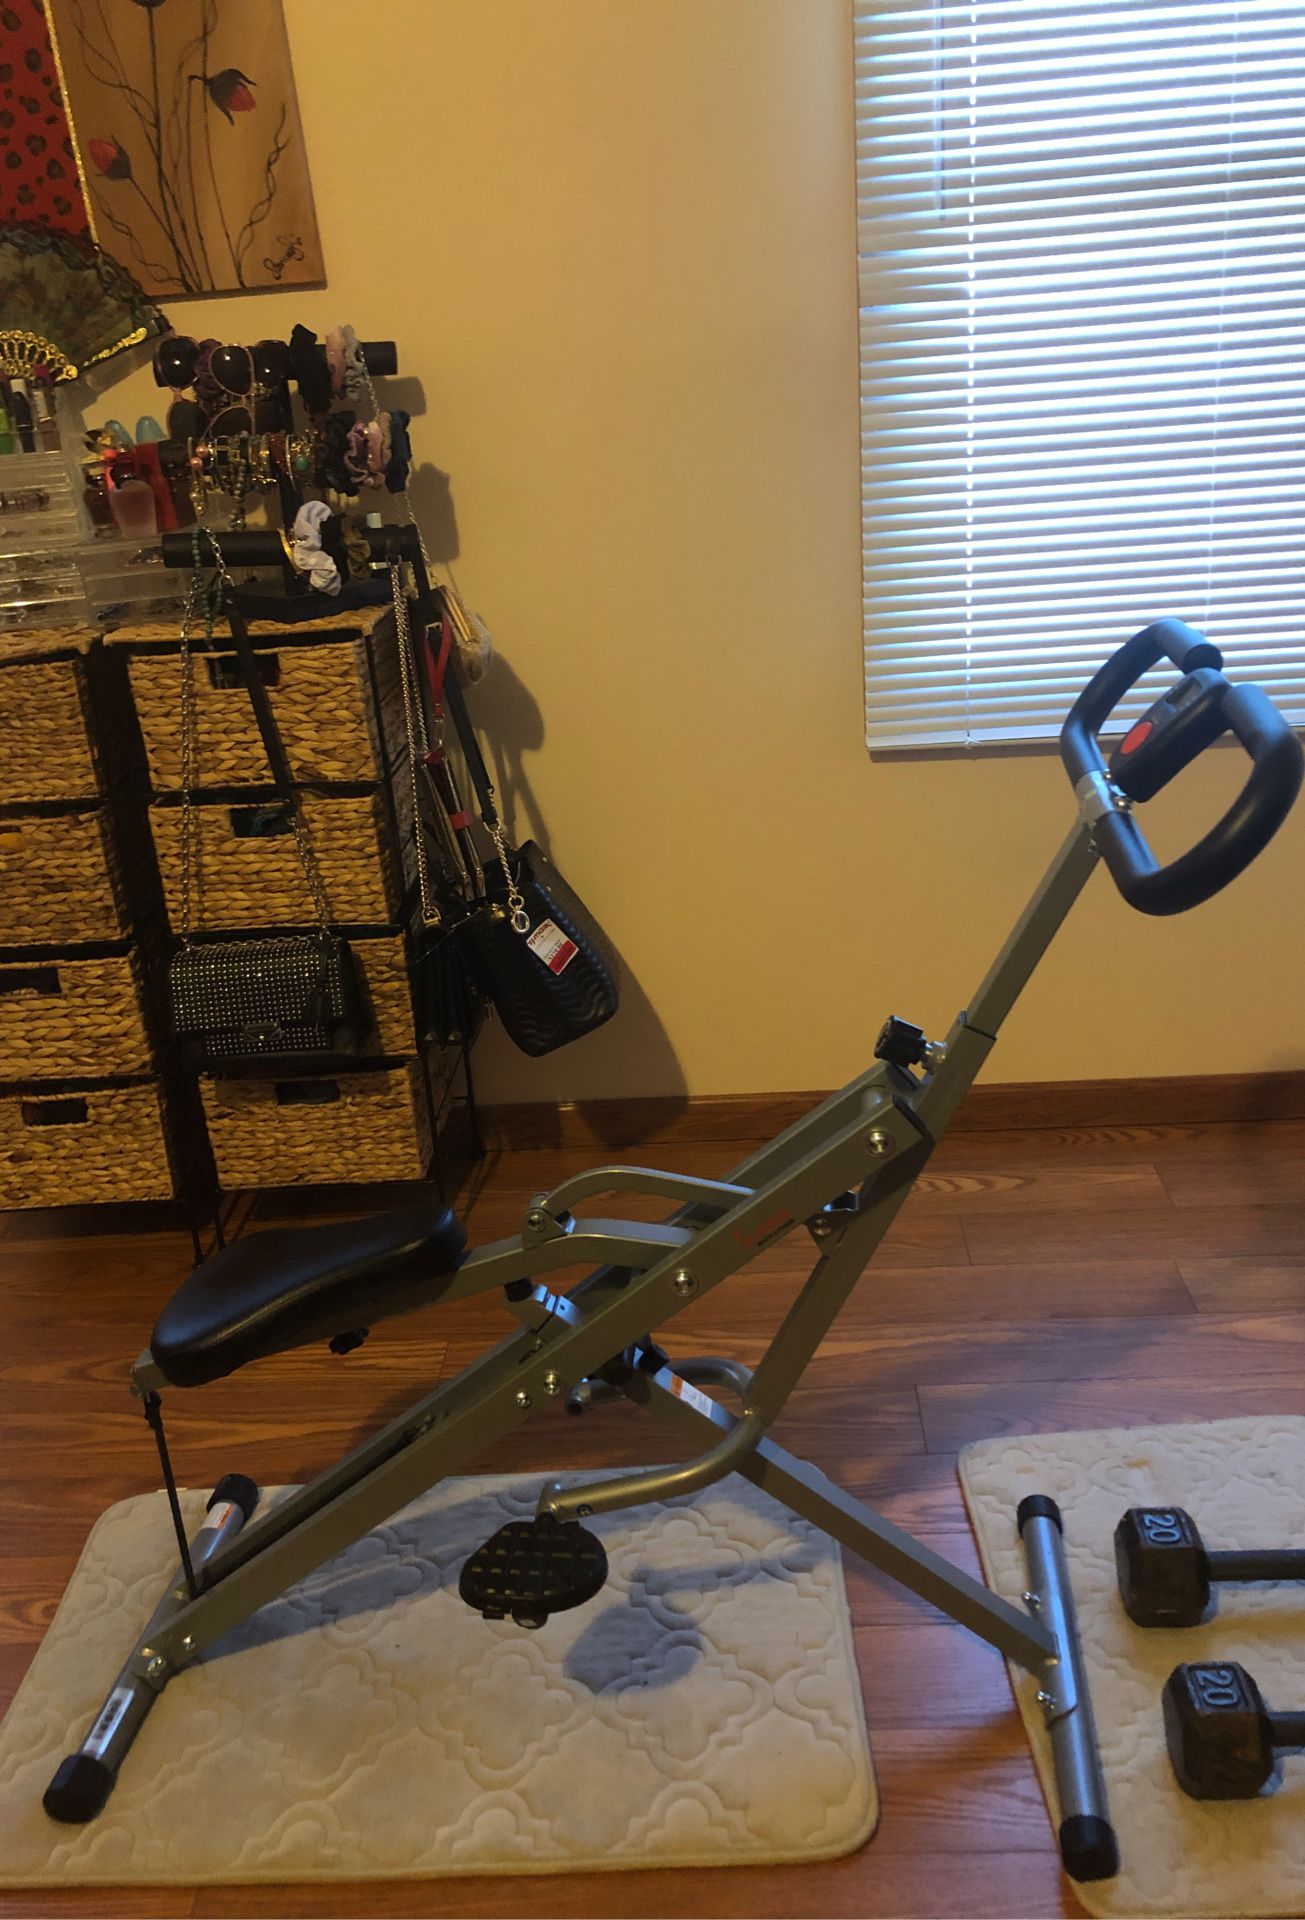 New Sunny, health and fitness exercise equipment